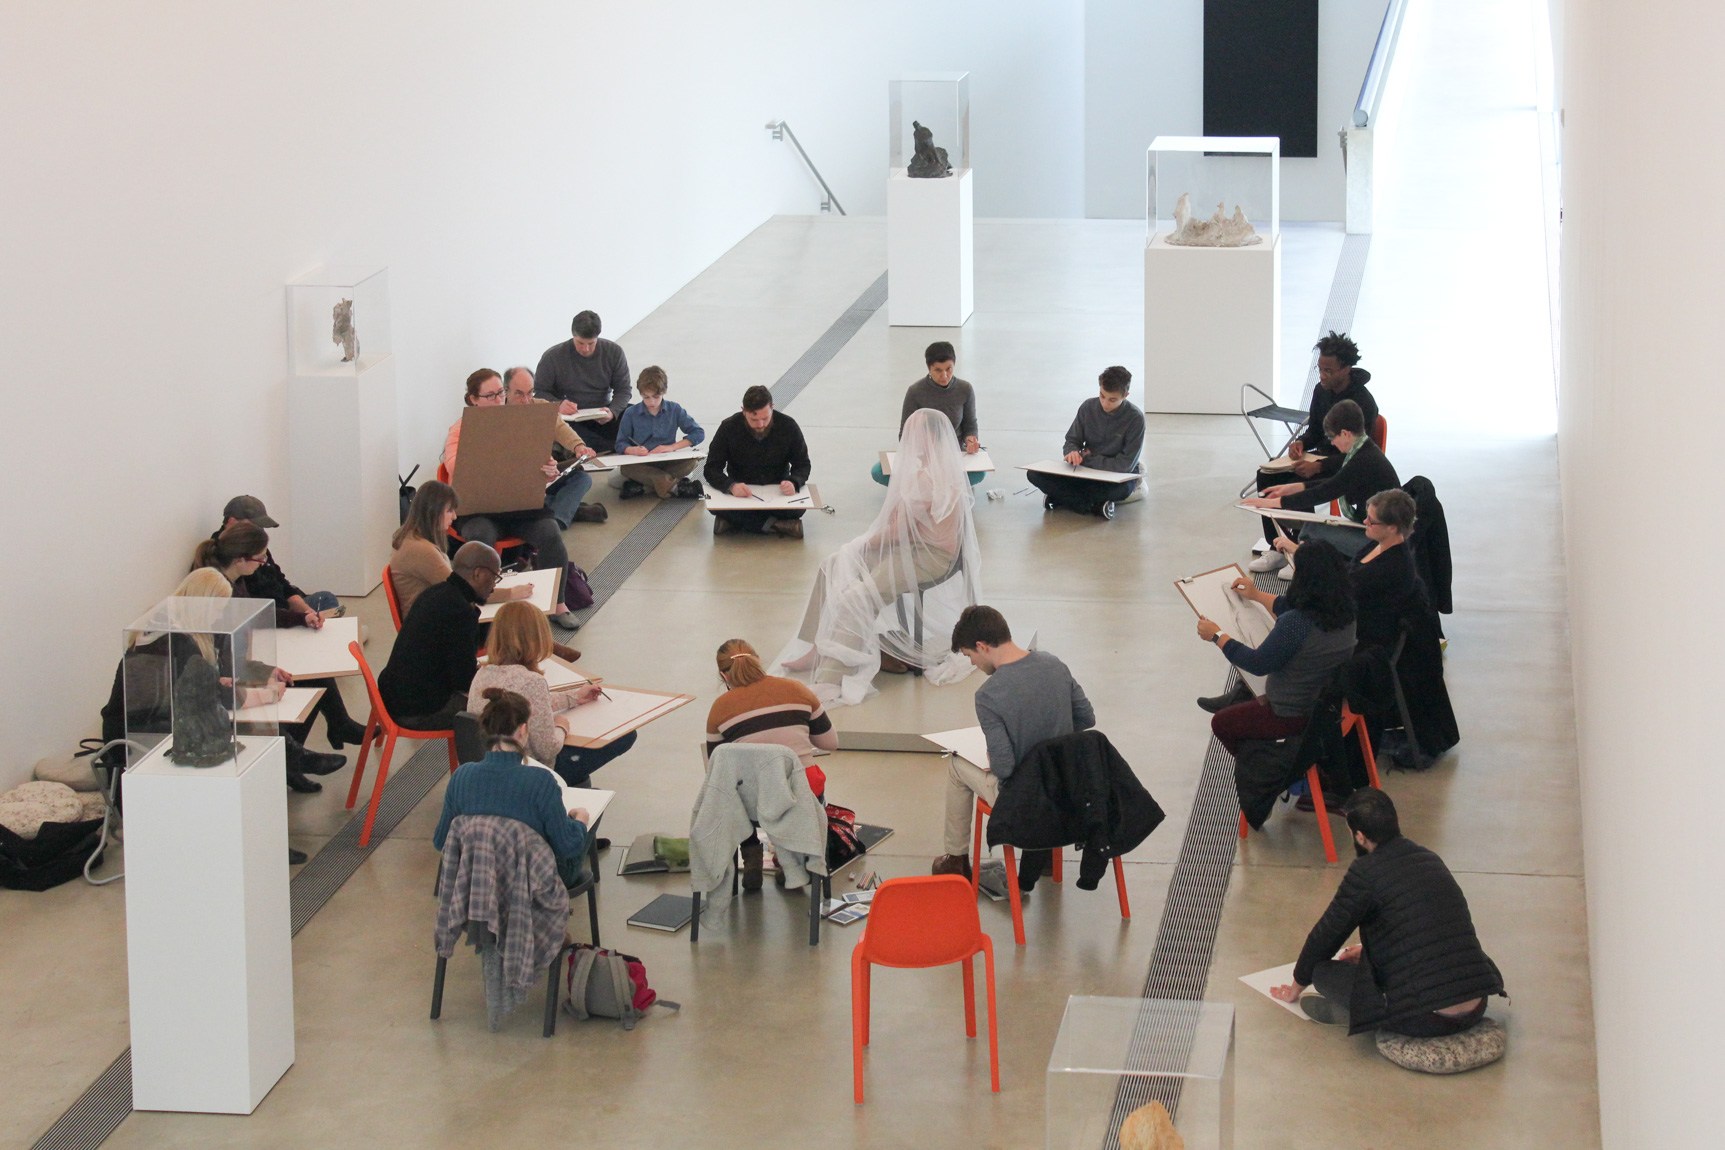 A circle of artists sketch a seated model, covered in shear fabric in the Main Gallery.